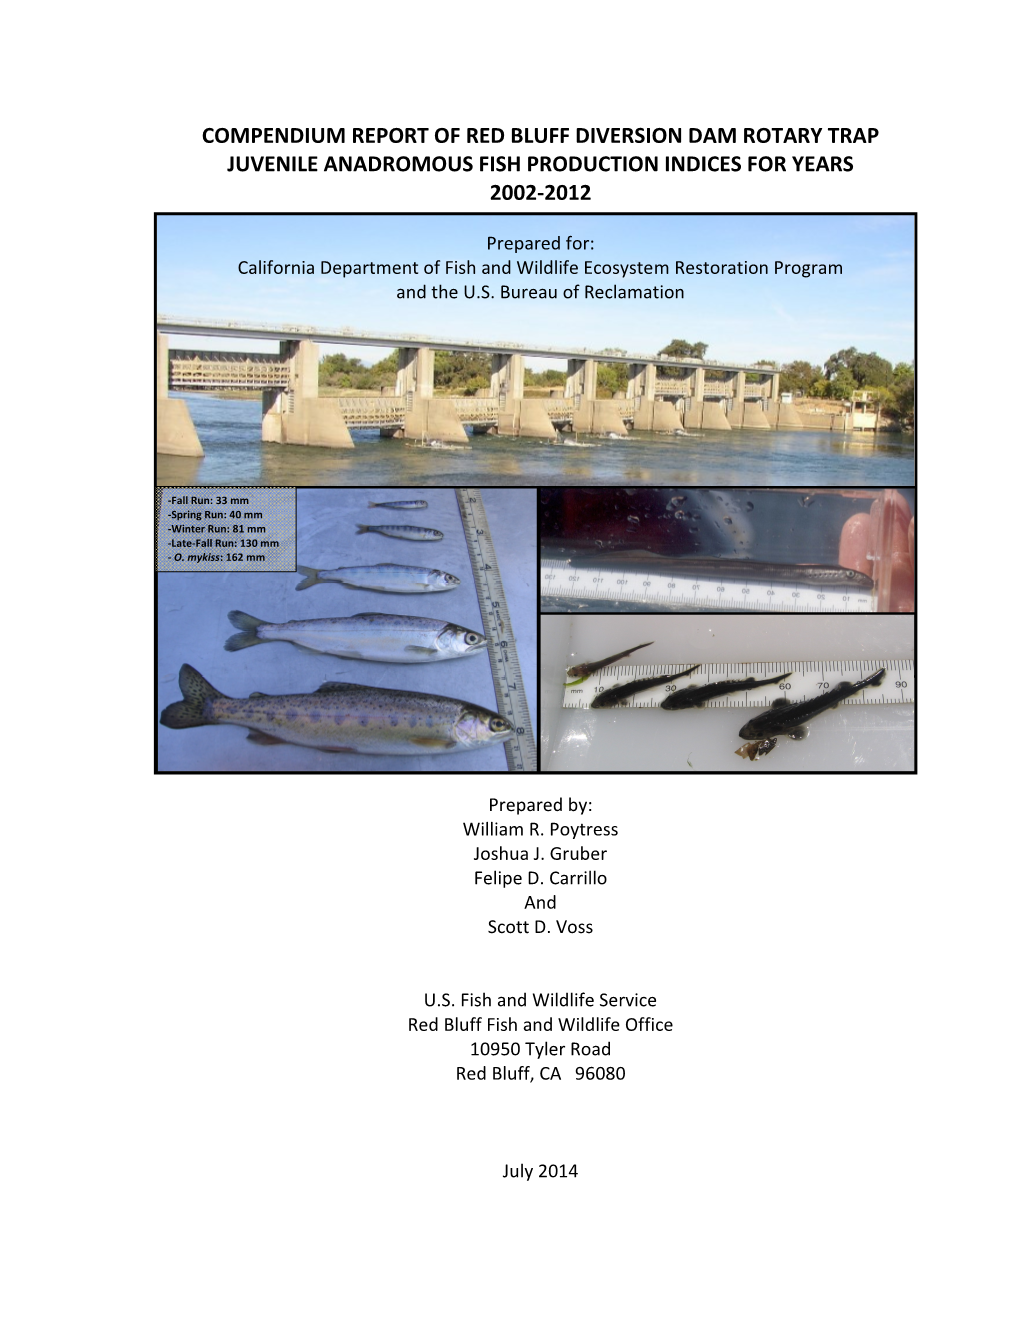 Compendium Report of Red Bluff Diversion Dam Rotary Trap Juvenile Anadromous Fish Production Indices for Years 2002-2012